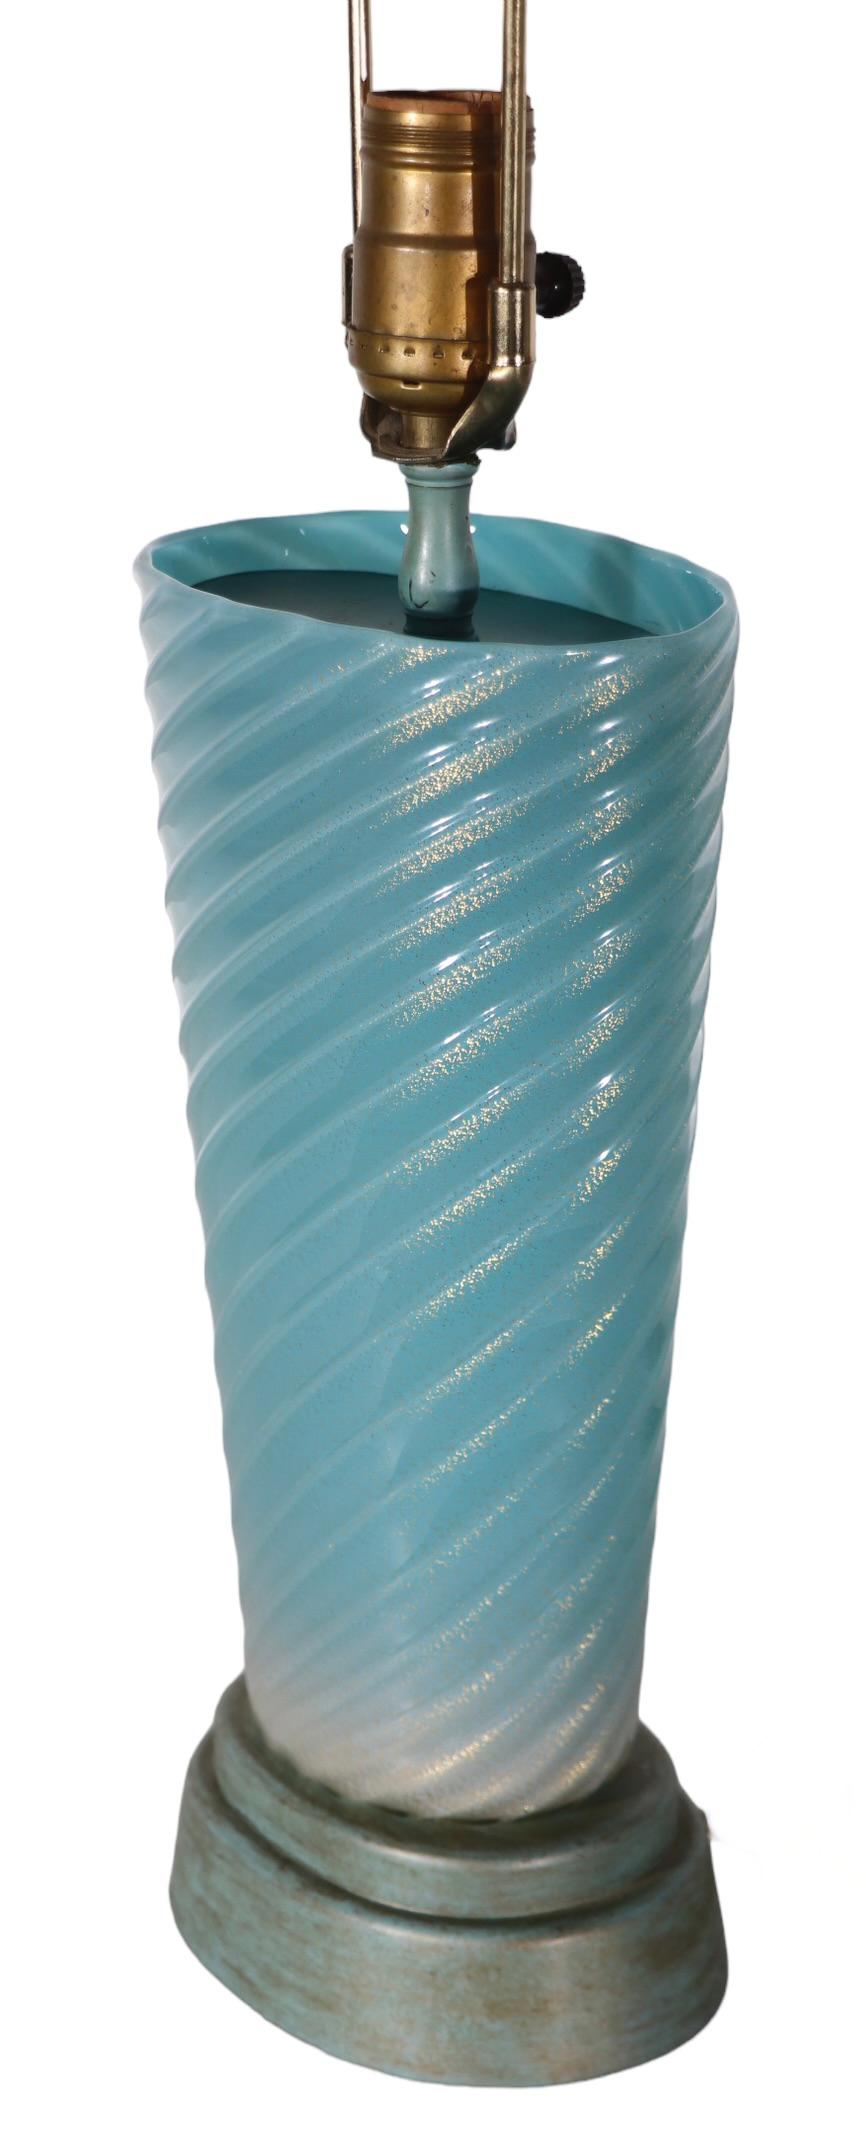 Murano Glass Lamp Blue Swirl with Gold Inclusion possibly Fratelli Toso, Seguso  For Sale 11